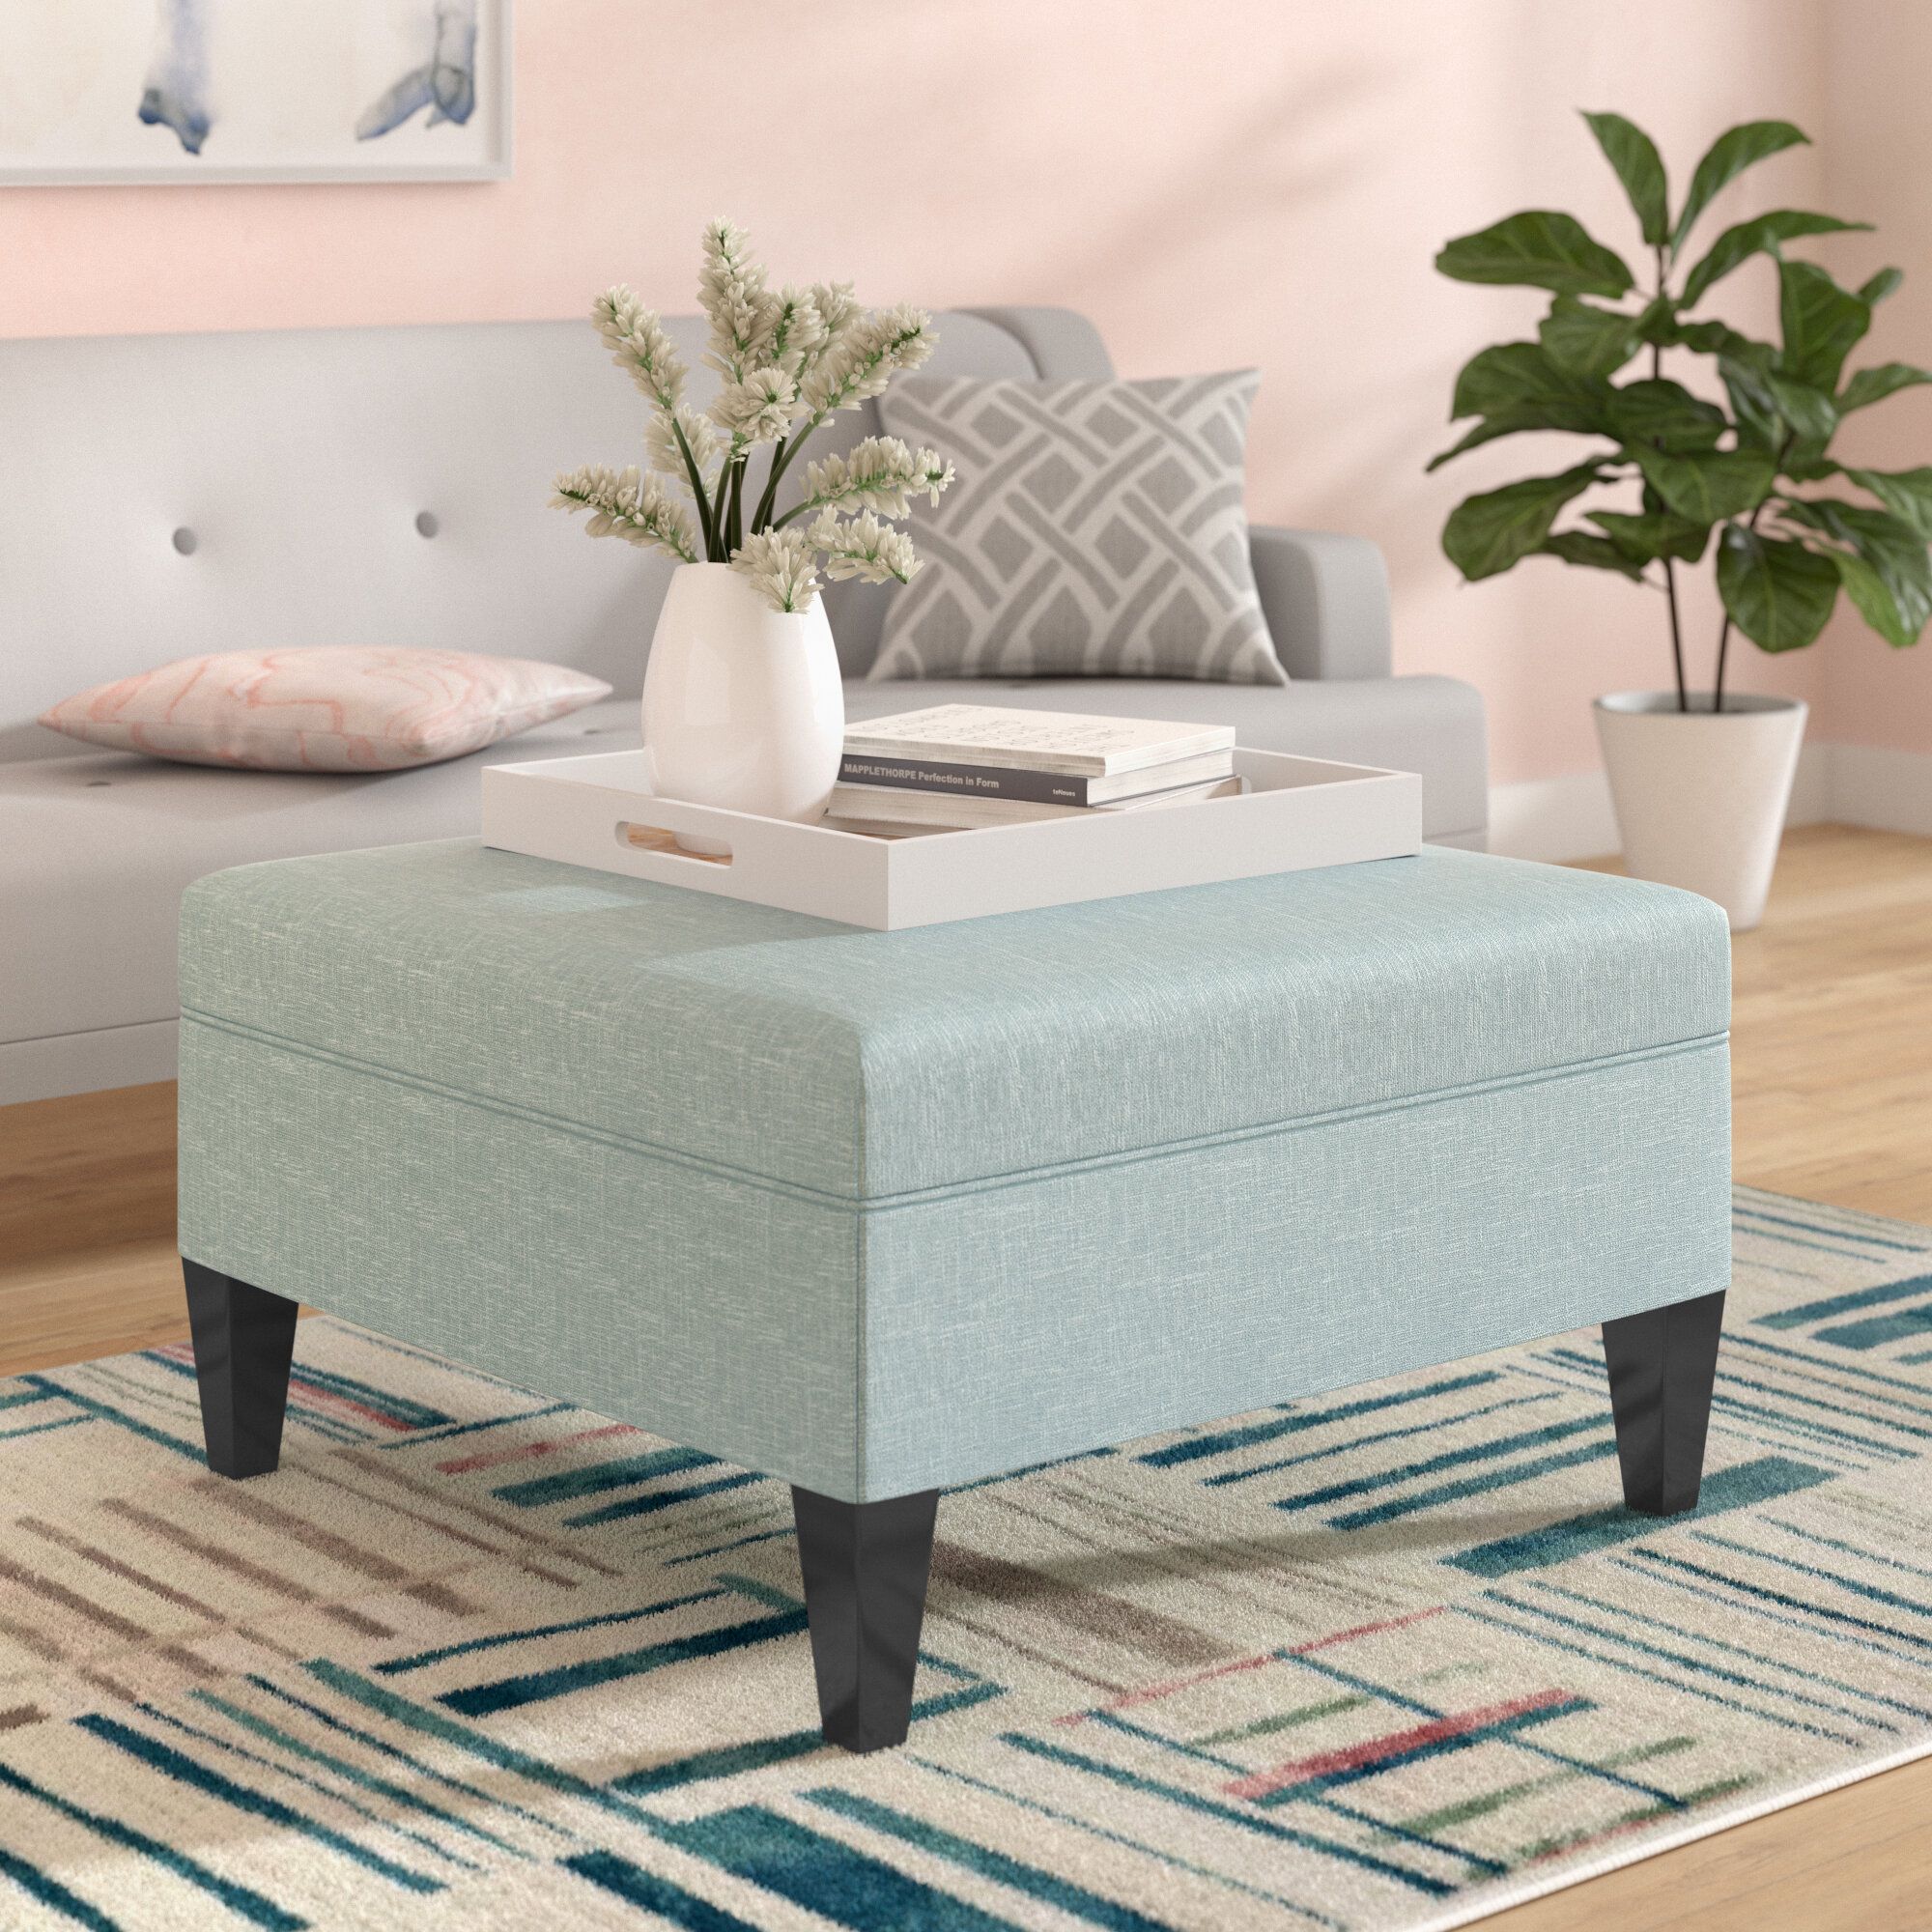 Brayden Studio® Gamino Upholstered Ottoman & Reviews | Wayfair With 19 Inch Ottomans (View 11 of 15)